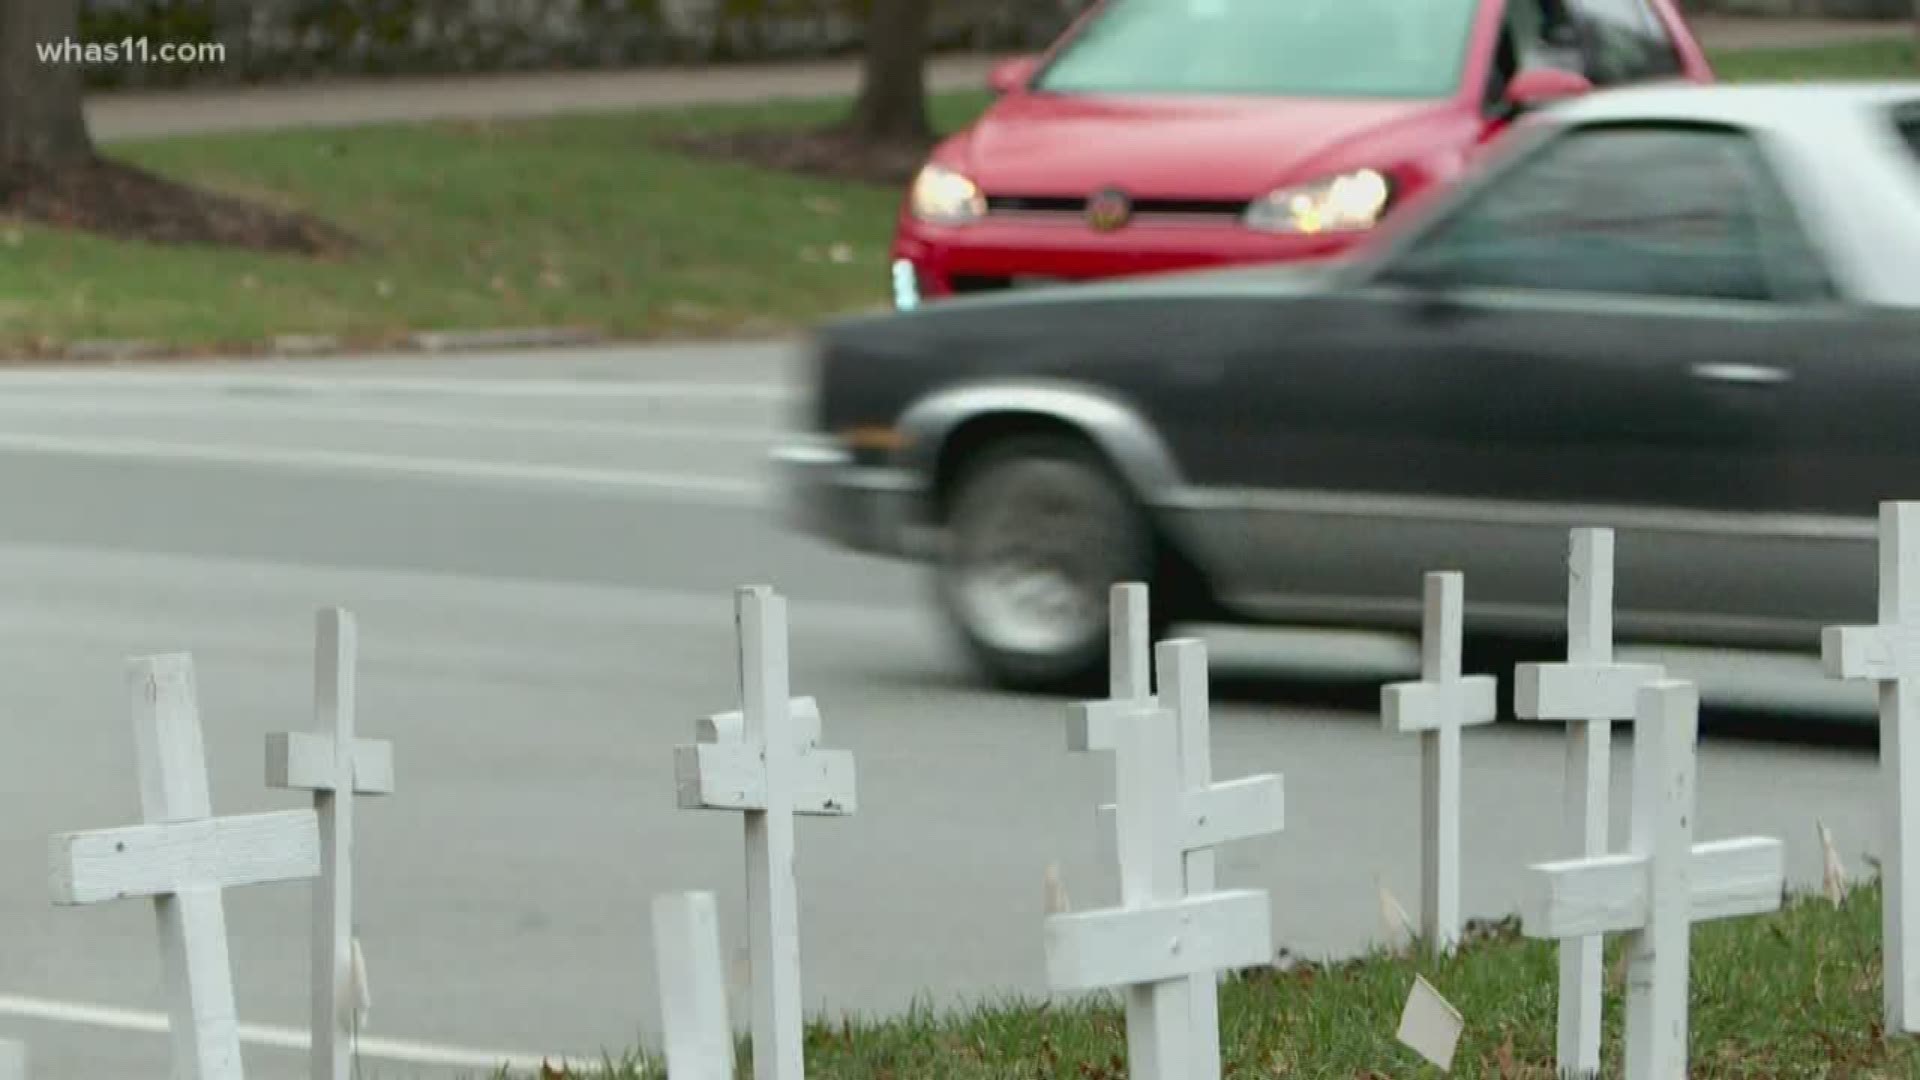 As the year comes to a close, a local church has placed white crosses on their lawn to remember homicide victims.